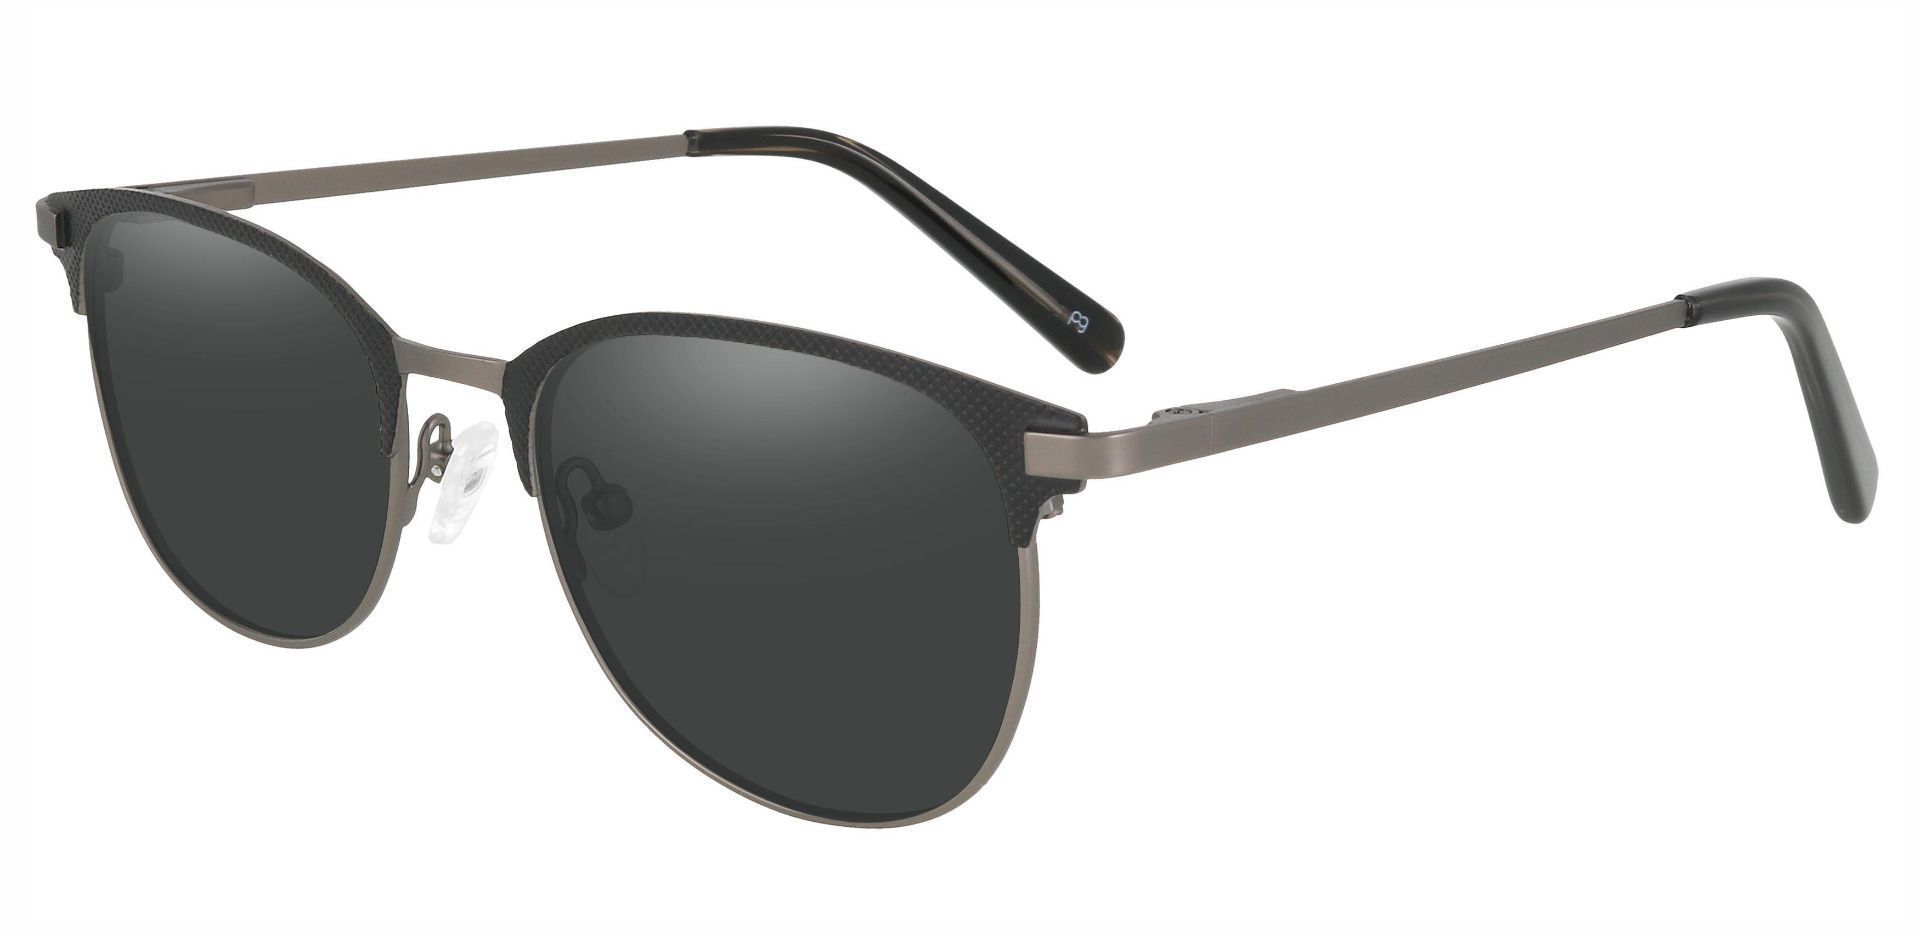 Roscoe Oval Lined Bifocal Sunglasses - Black Frame With Gray Lenses